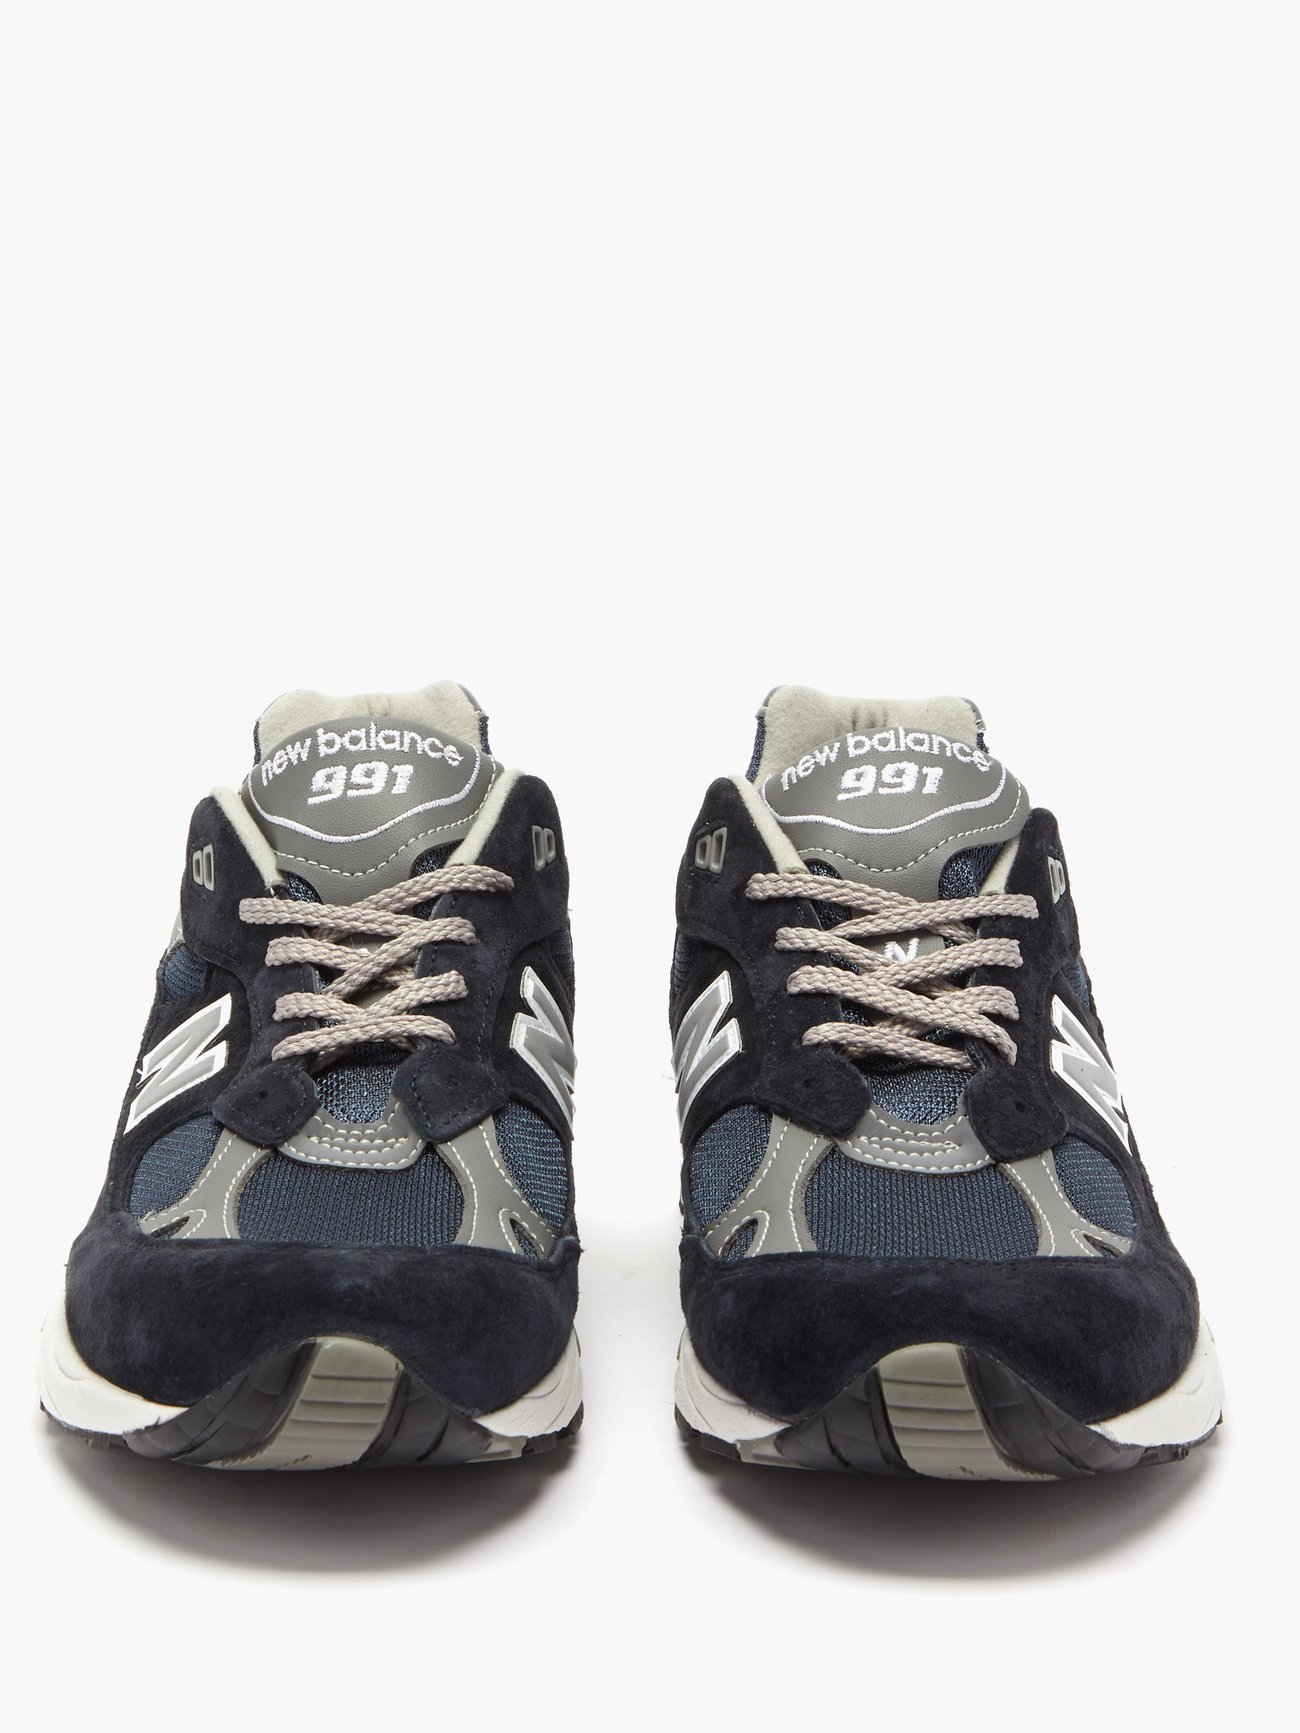 Navy Made in UK 991 suede and mesh trainers | New Balance